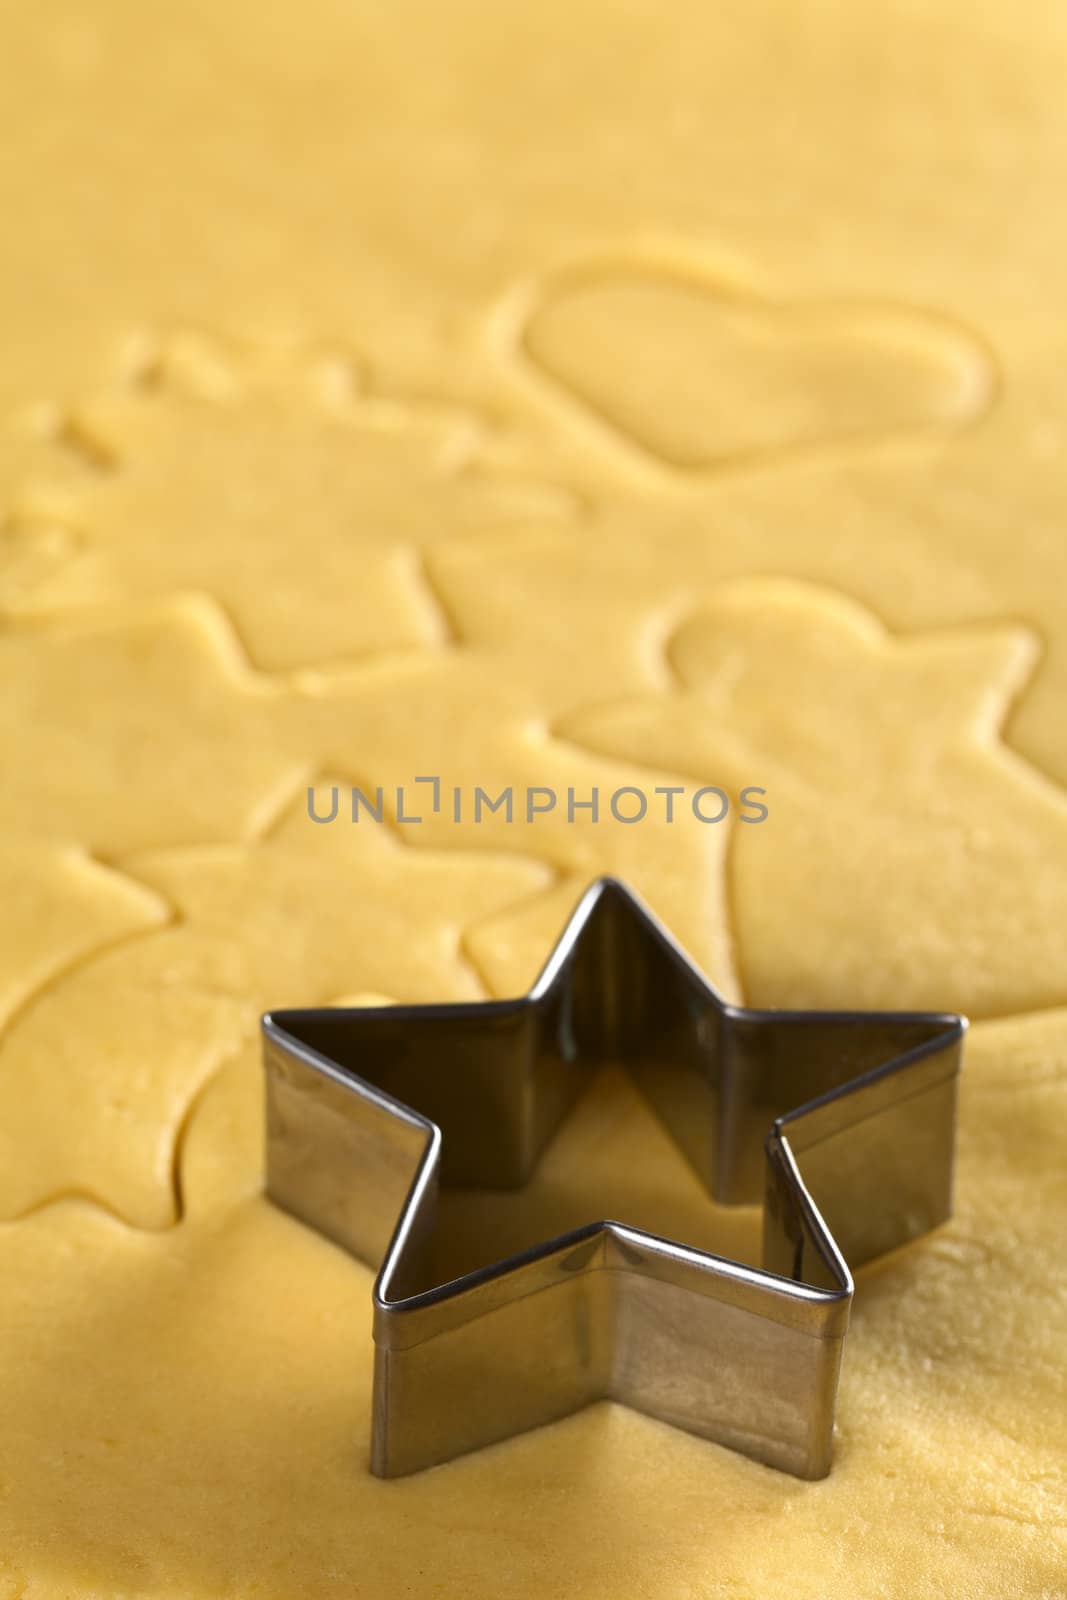 Star-shaped cookie cutter and other Christmas shapes cut into dough (Selective Focus, Focus on the two front edges of the star-shaped cutter)